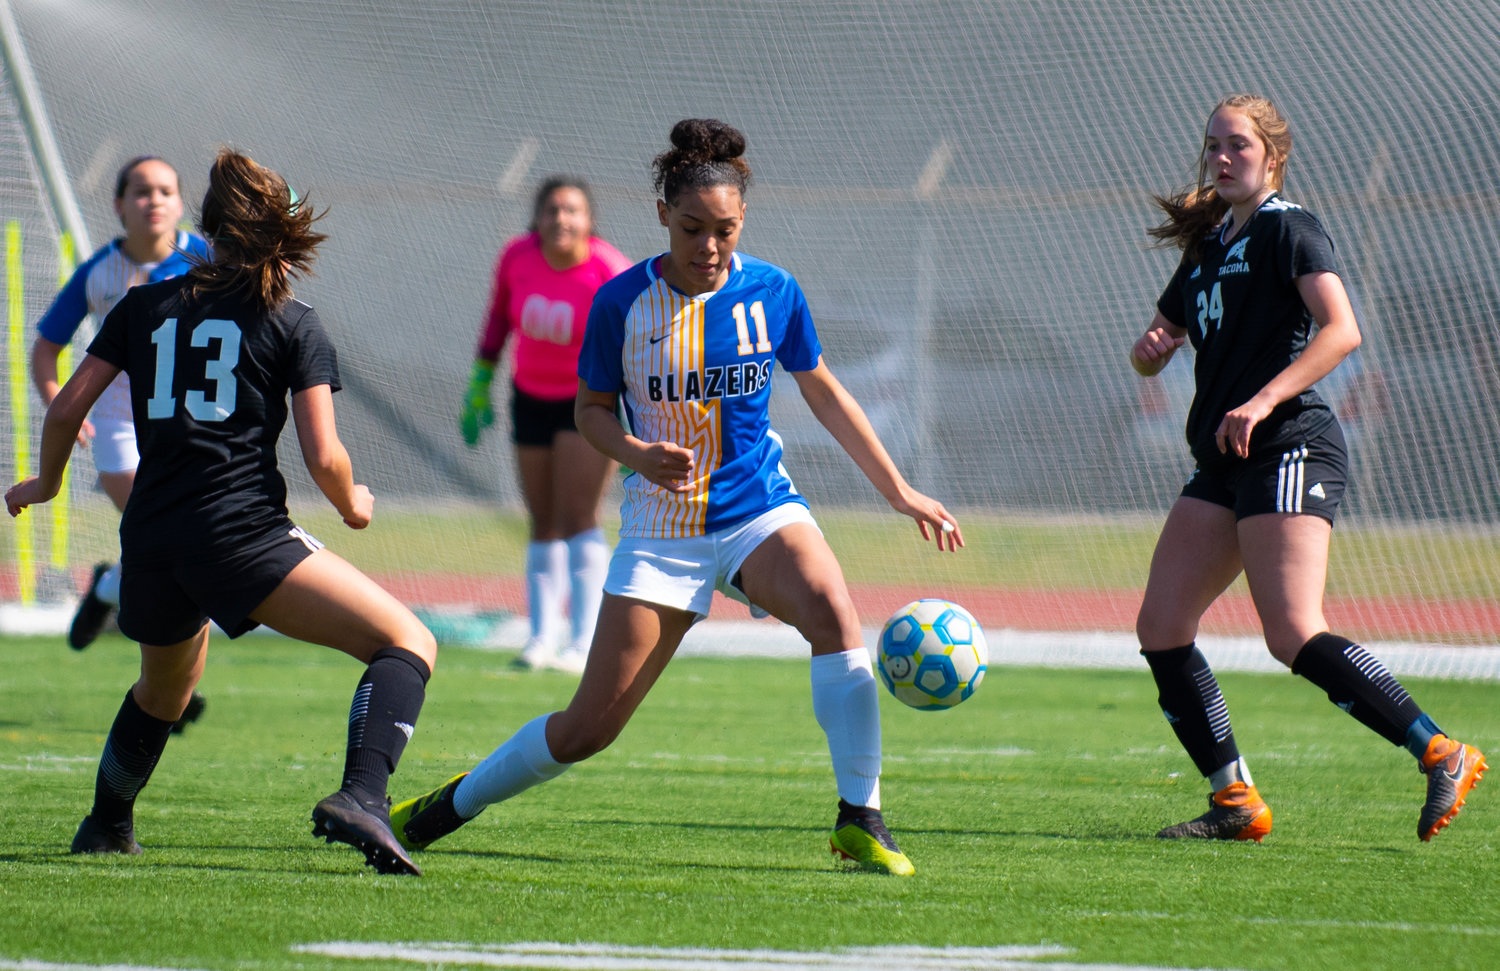 Centralia College freshman Imani Tustison (11) works the ball against Tacoma forwards on Tuesday at Tiger Stadium.